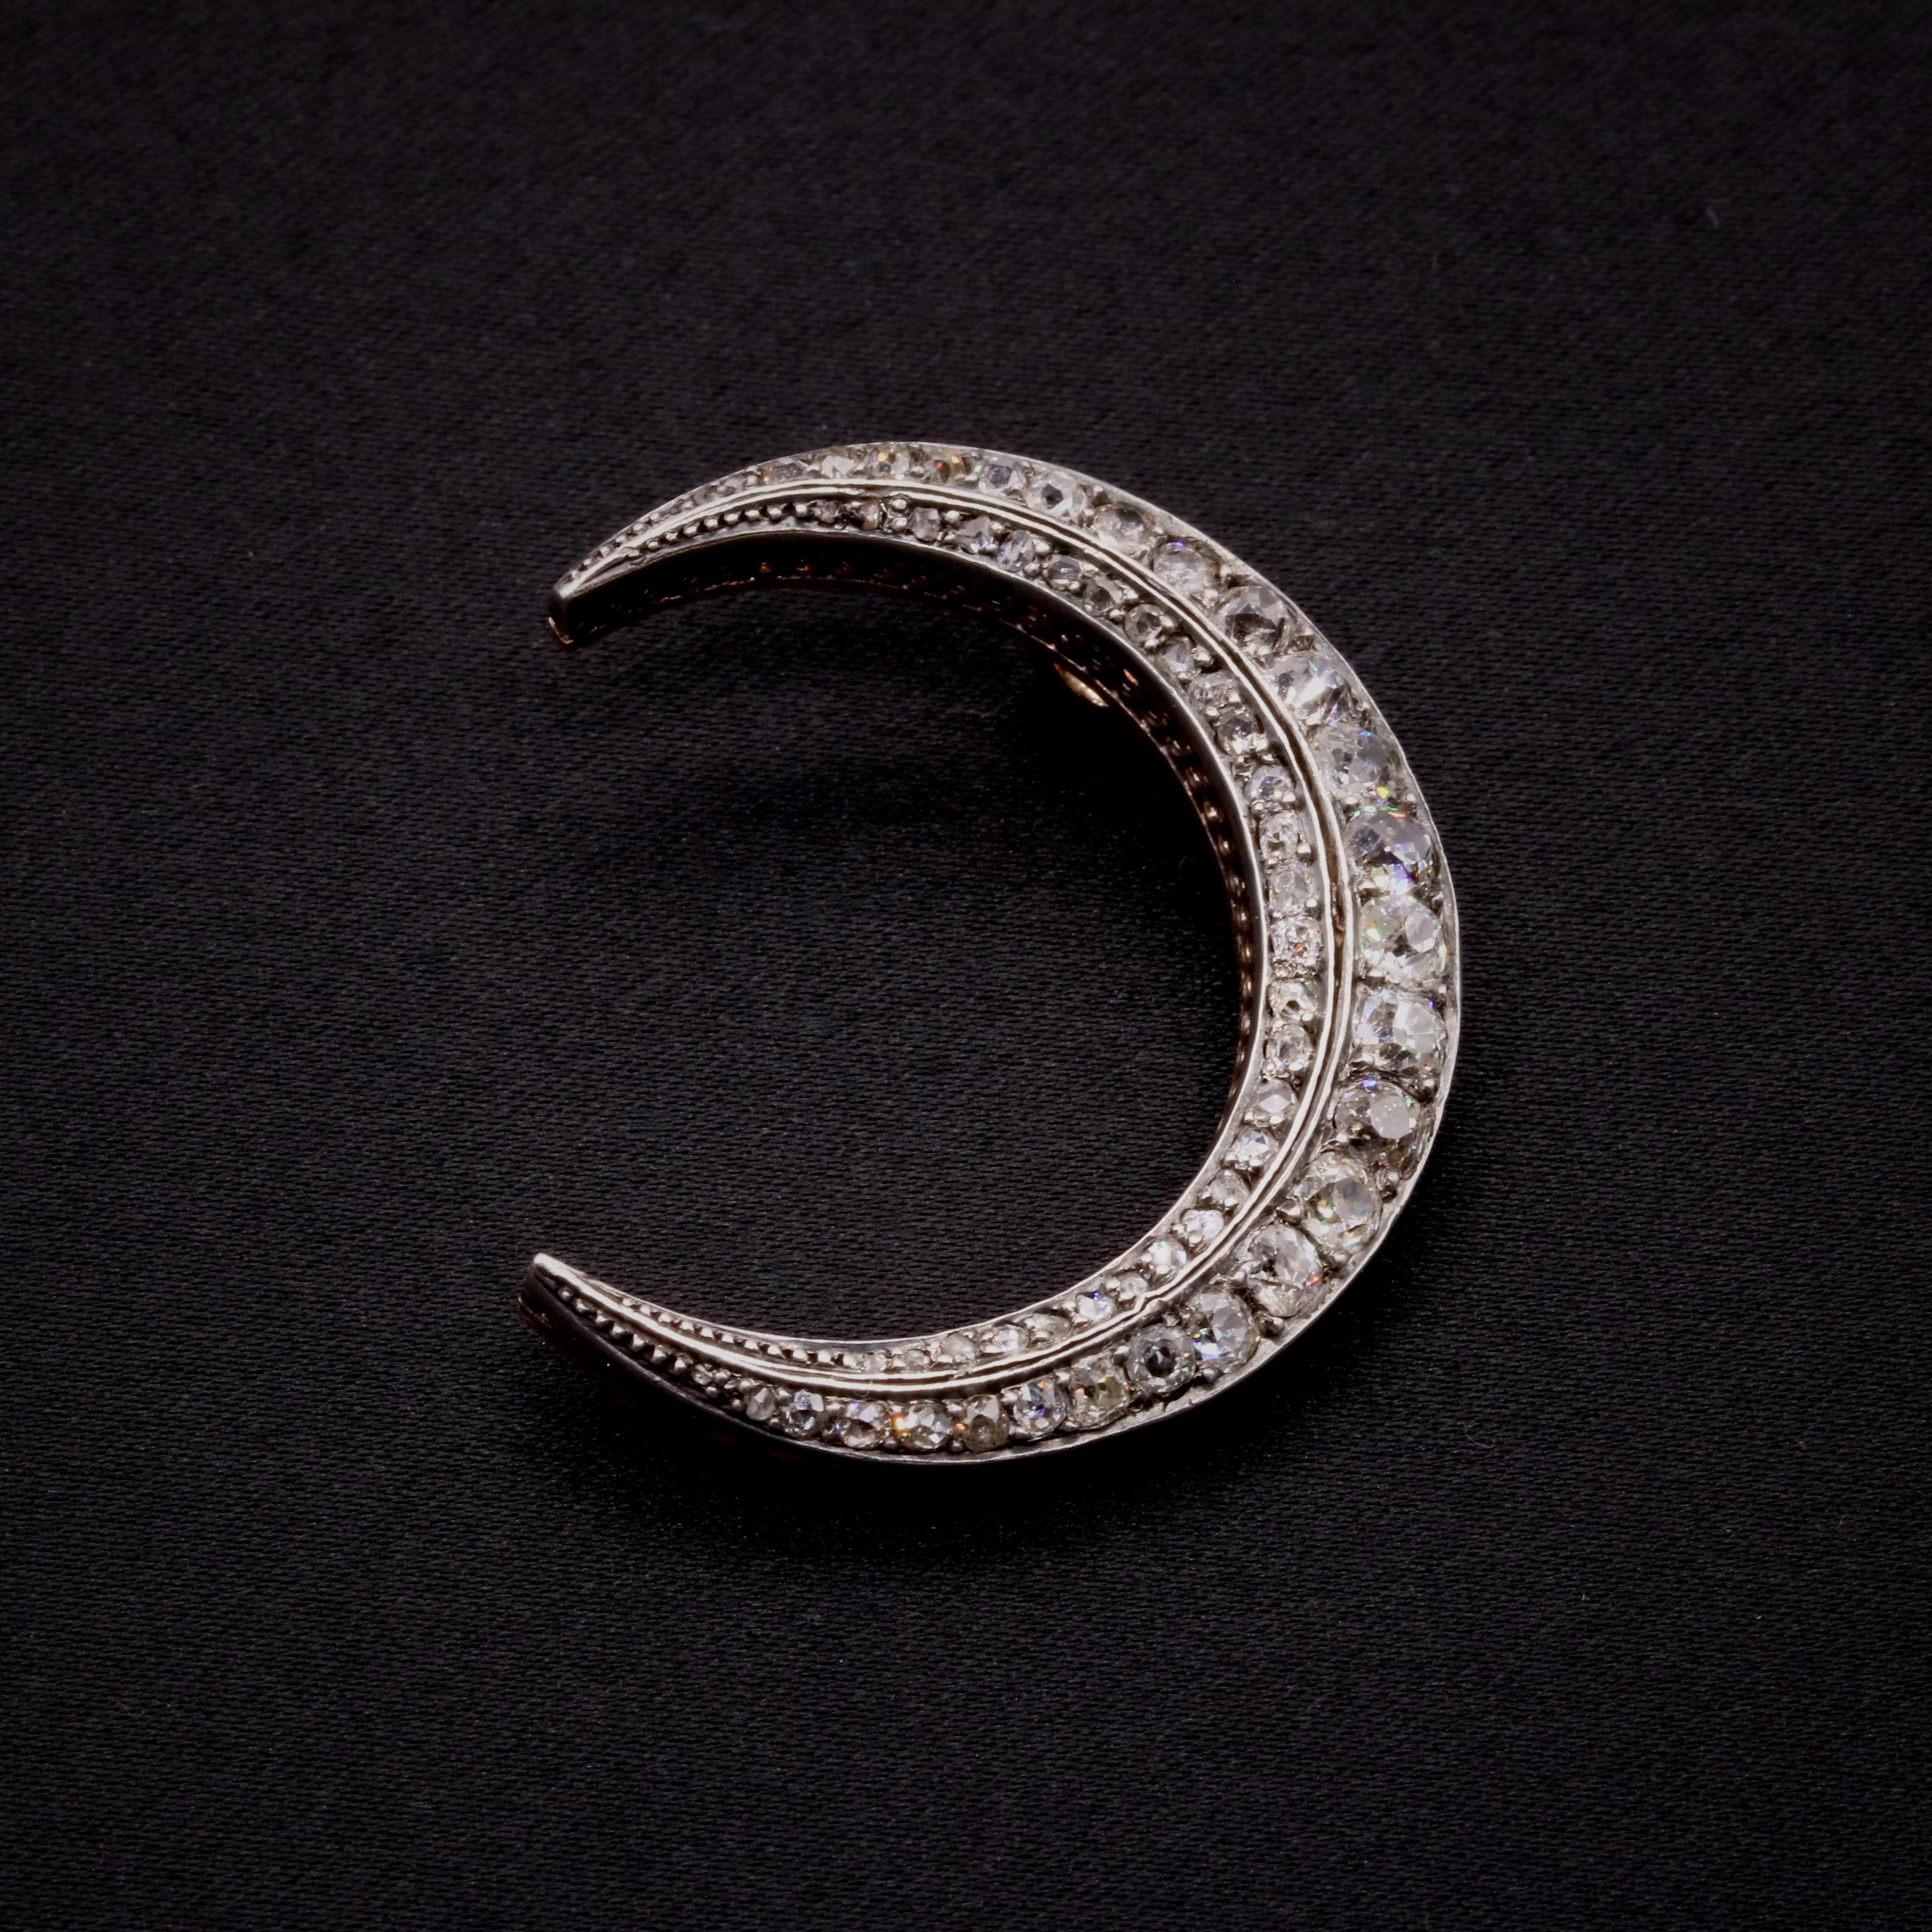 Antique Victorian 15K Gold & Silver 2.39ctw Diamond Crescent Brooch or Pendant For Sale 7